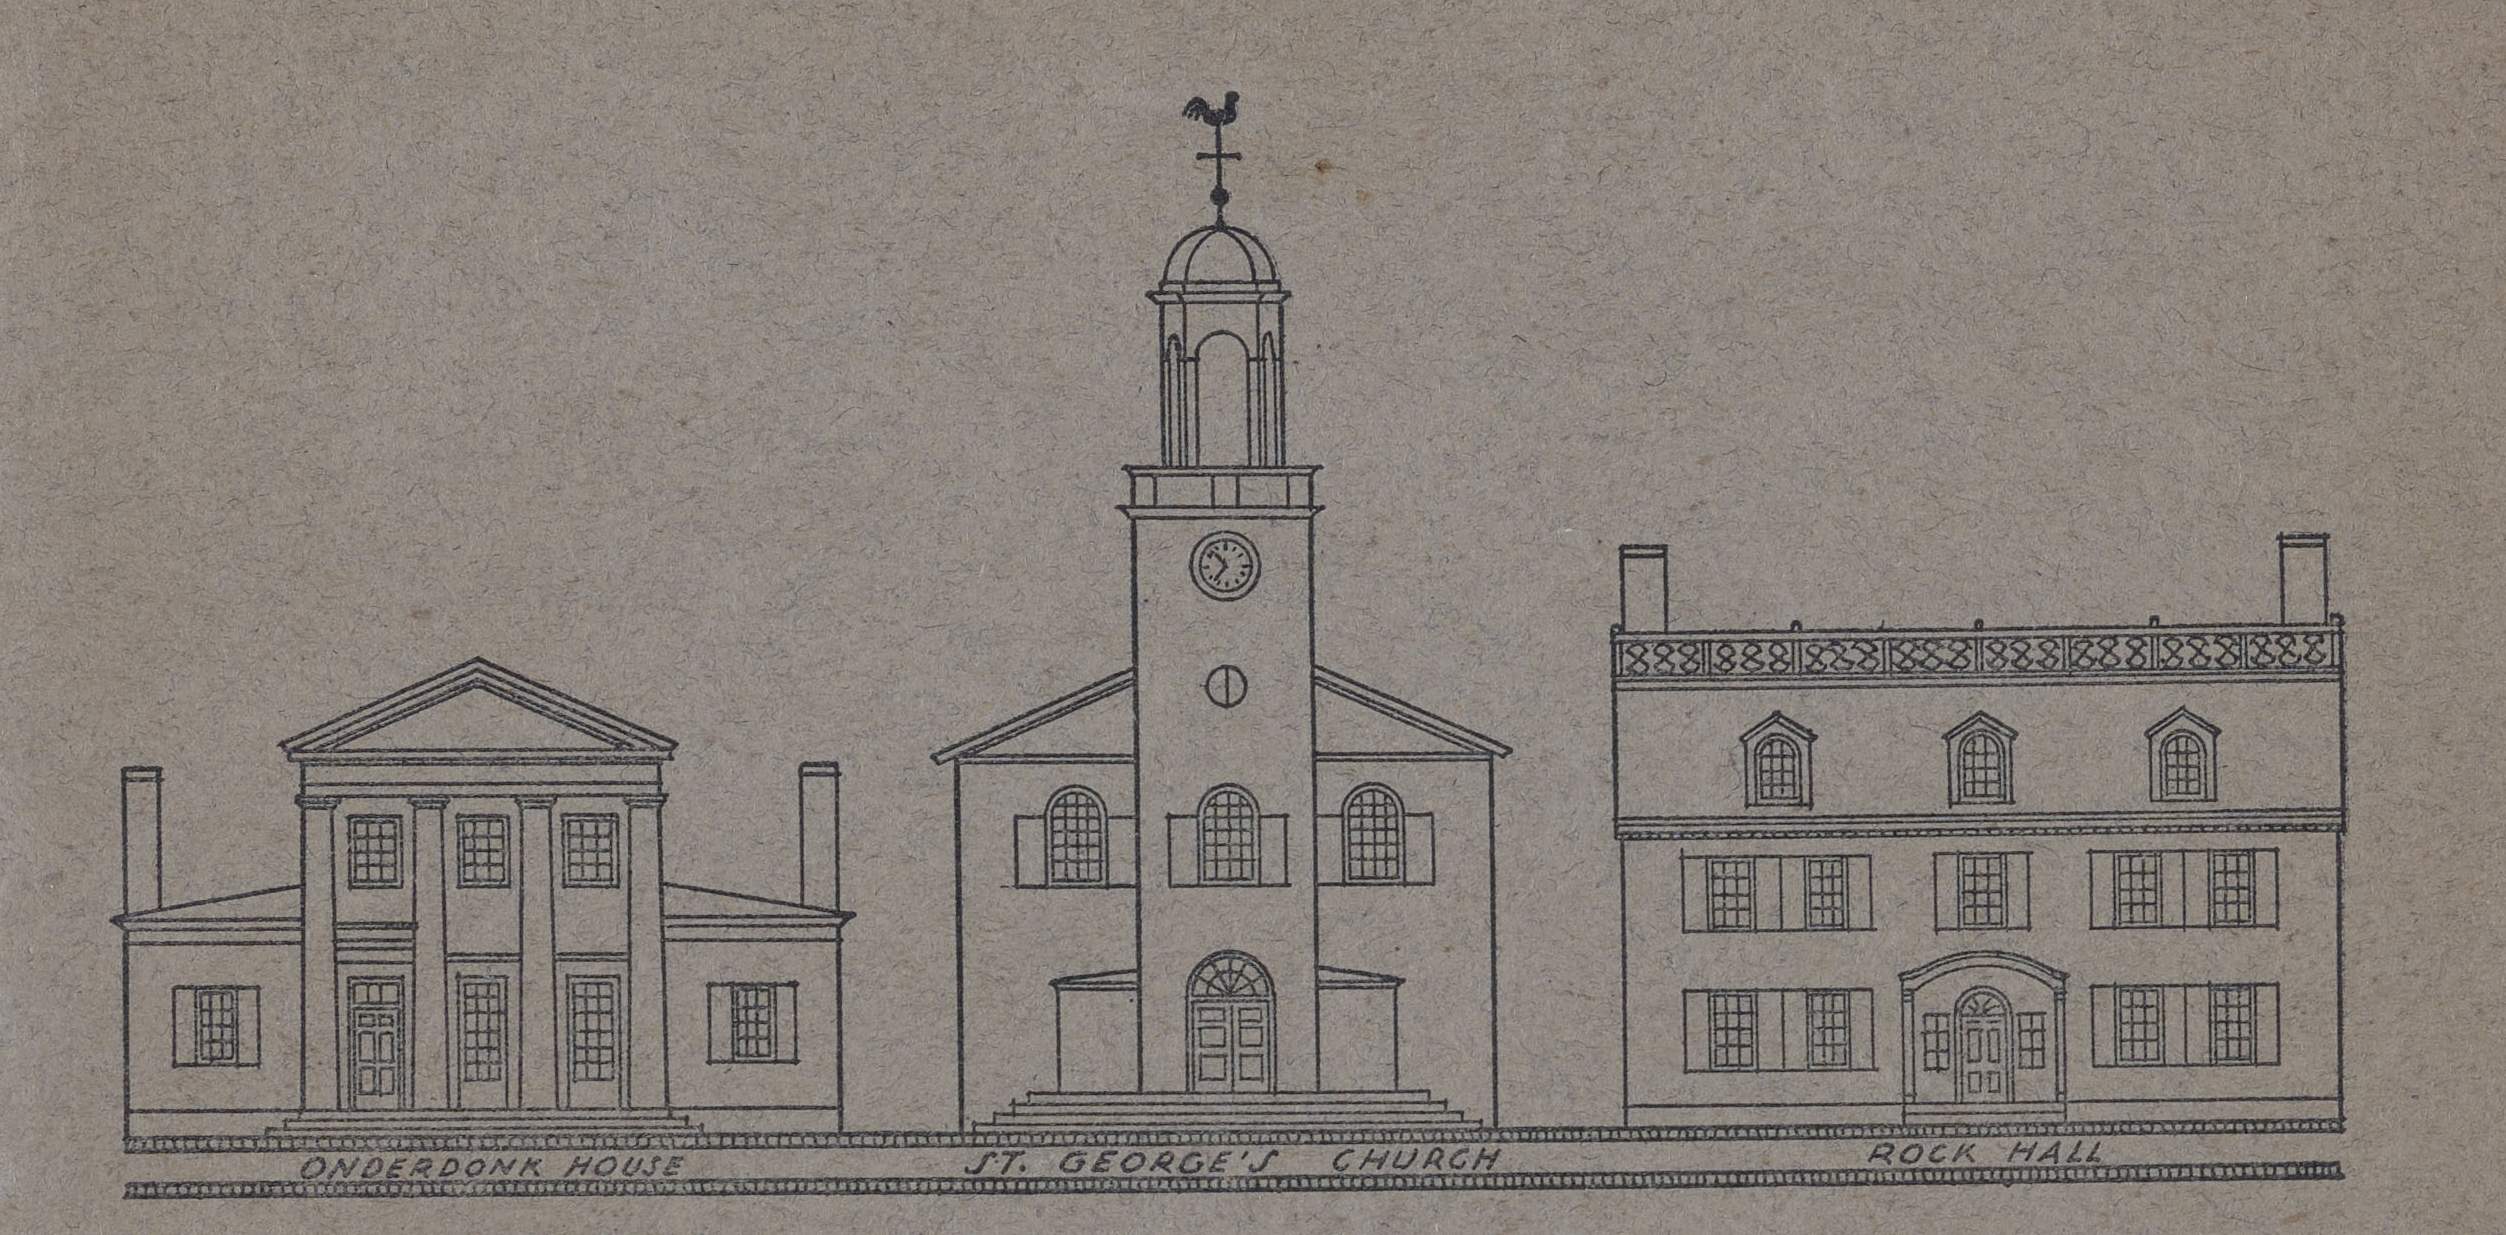 Line drawings showing 3 buildings, including a church at center